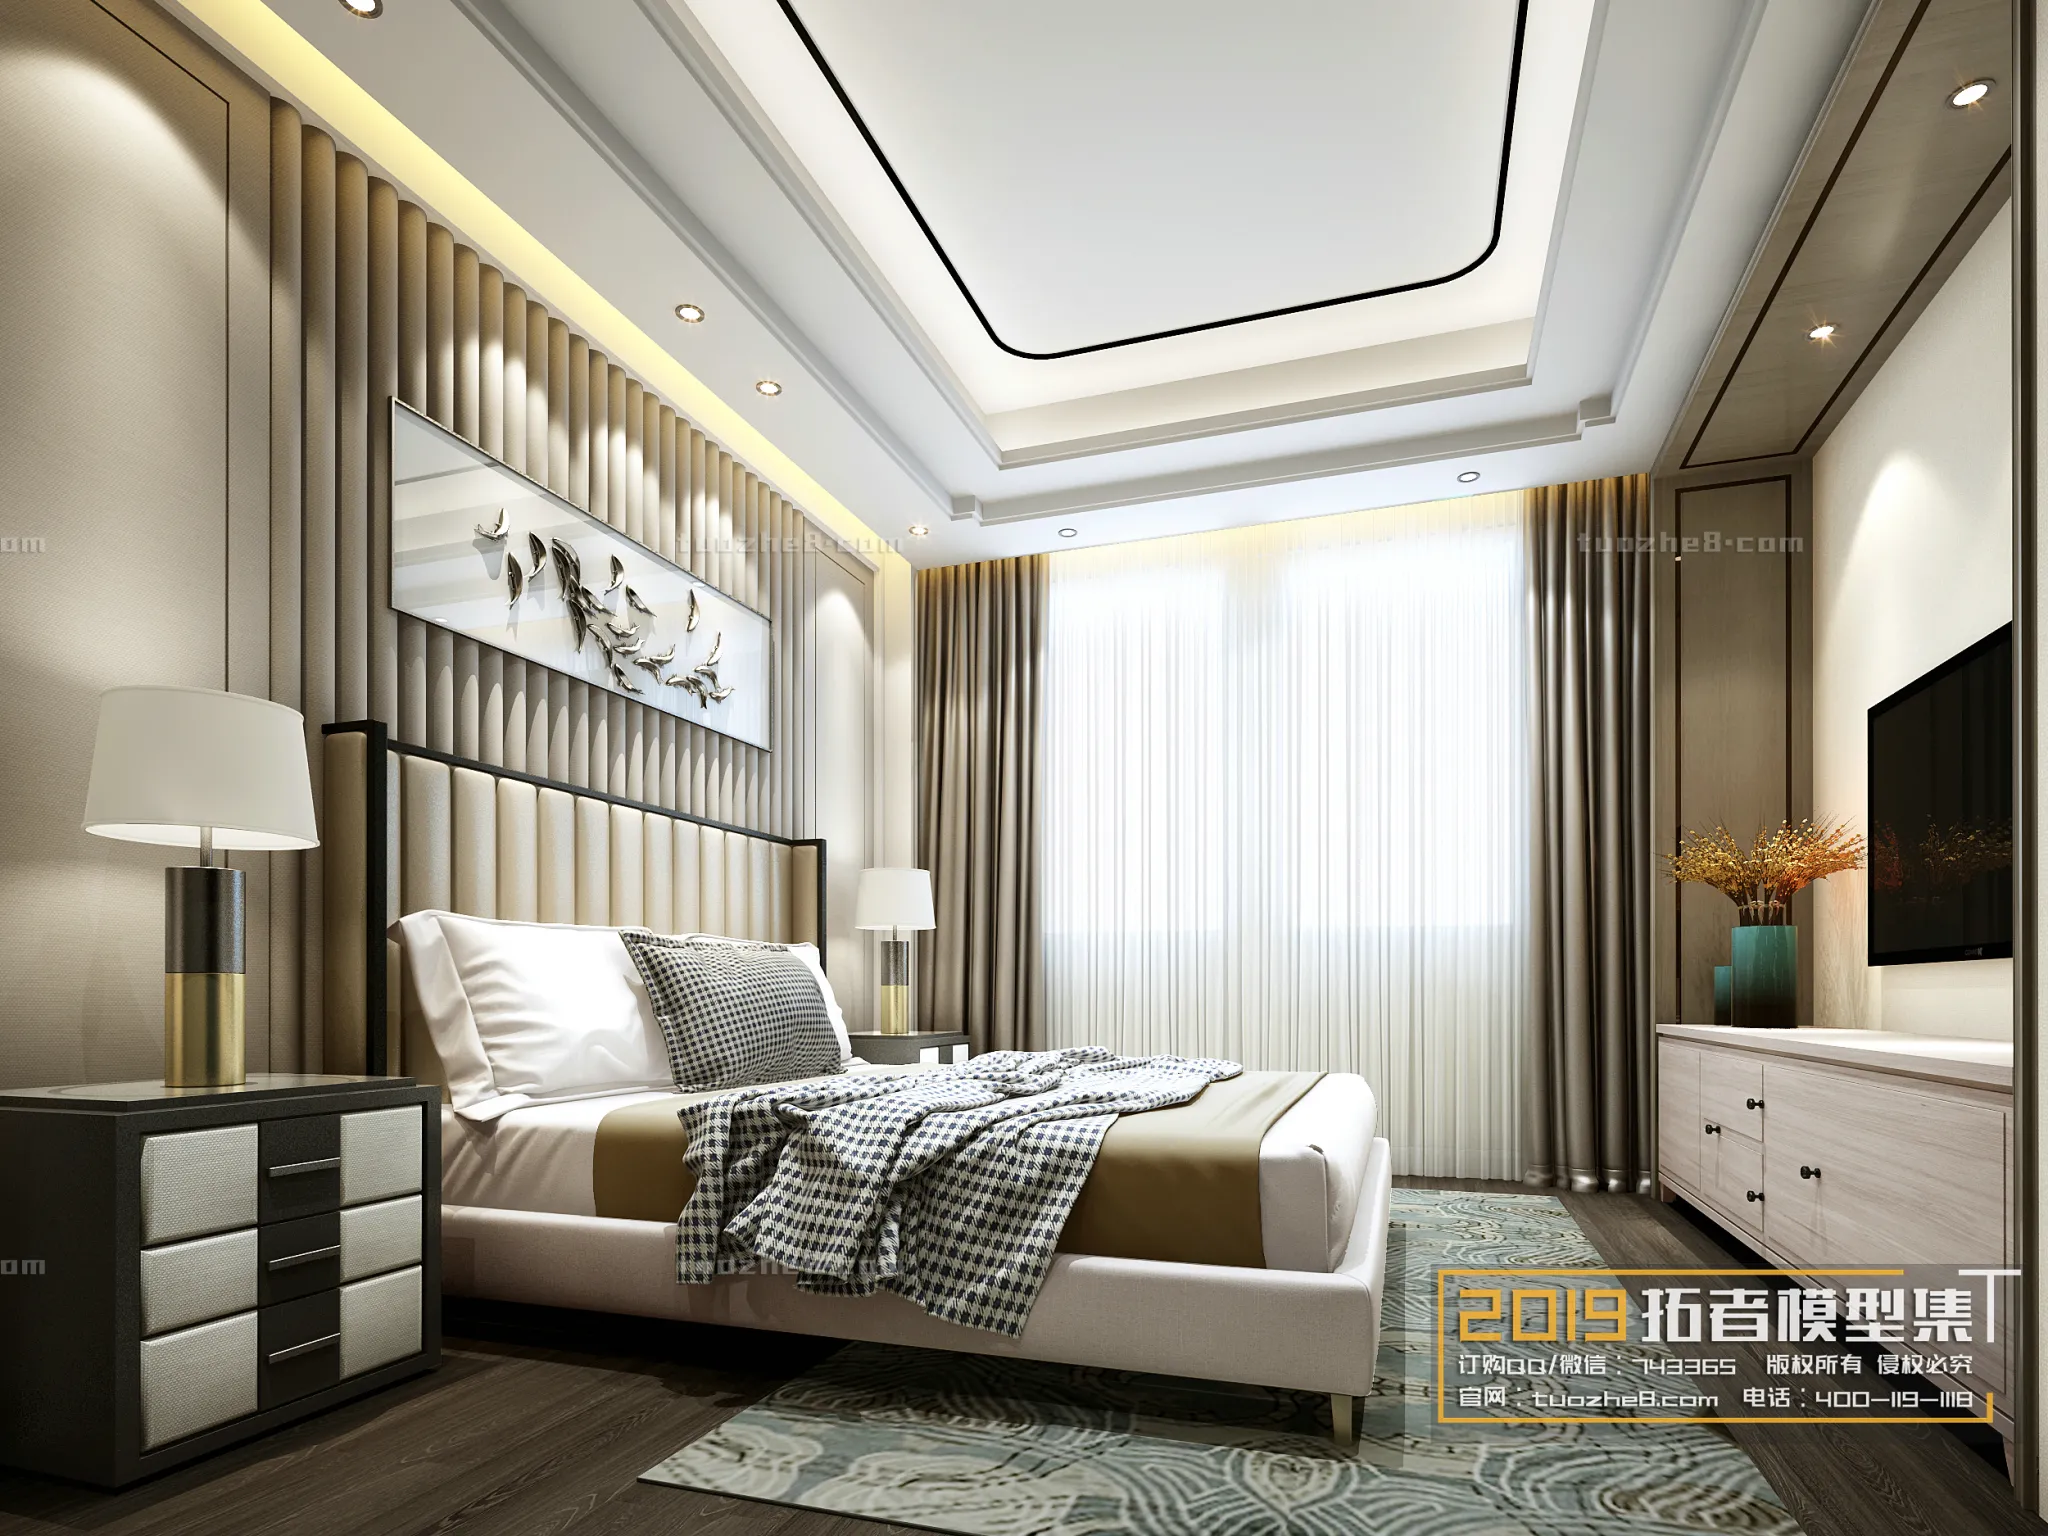 Extension Interior – BEDROOM – CHINESE STYLES – 013